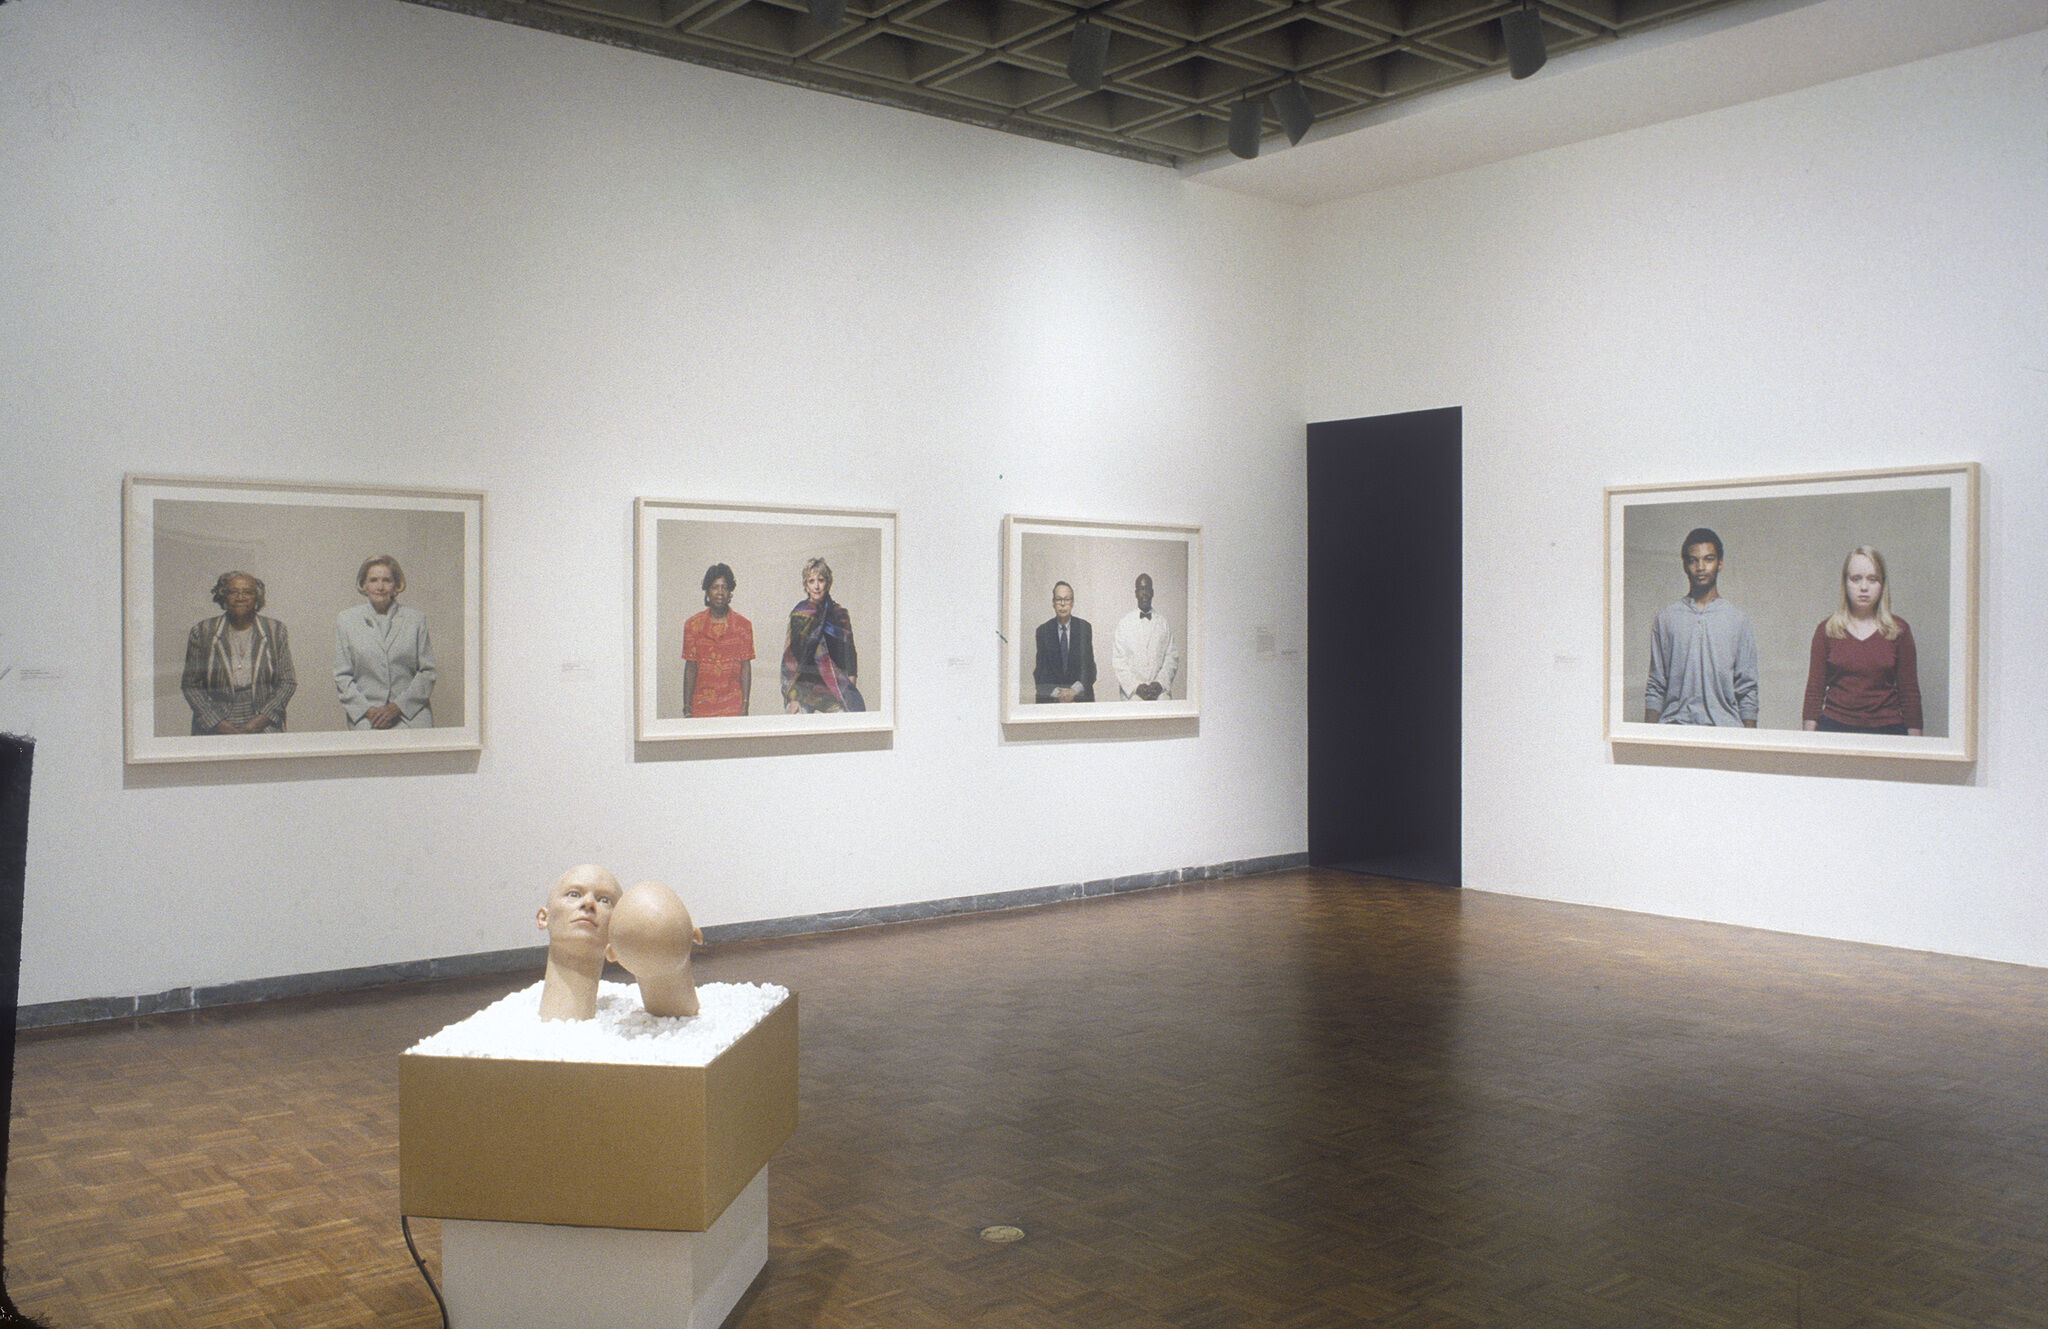 A gallery with portraits of people displayed on the walls and a sculpture.